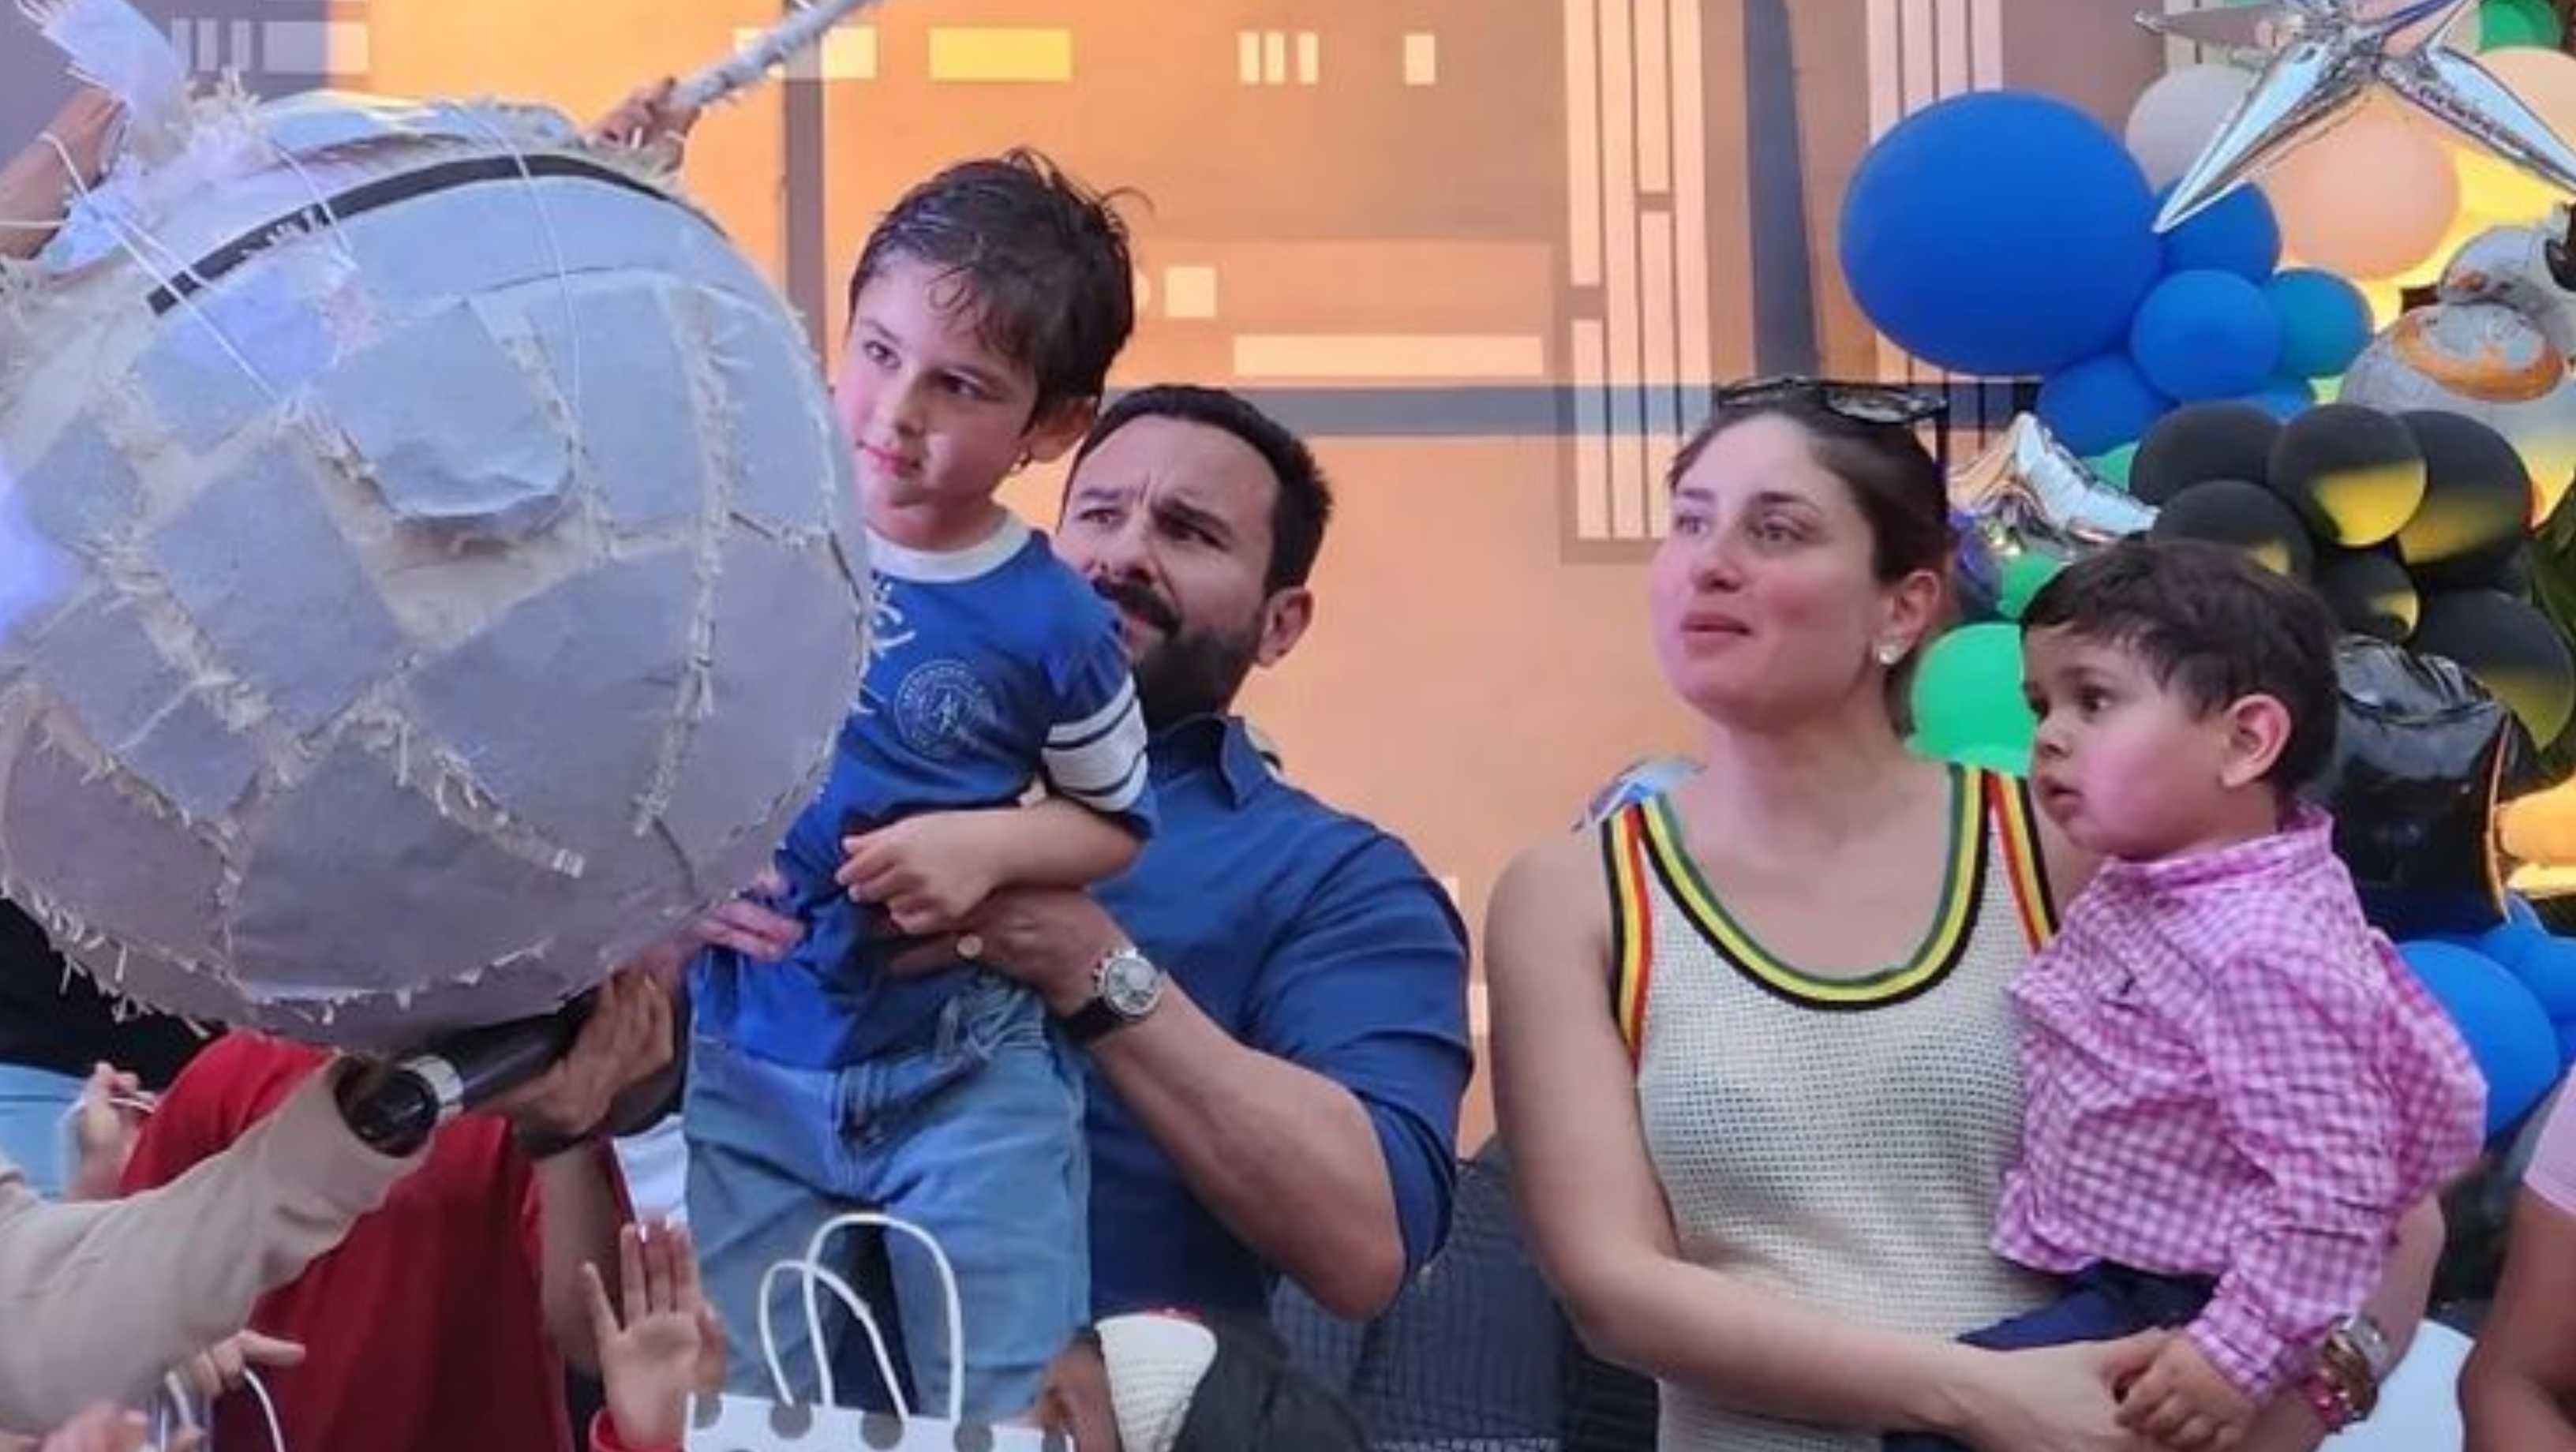 Saif Ali Khan reveals plans for Taimur’s birthday celebrations in London; calls his son a ‘well behaved kid’